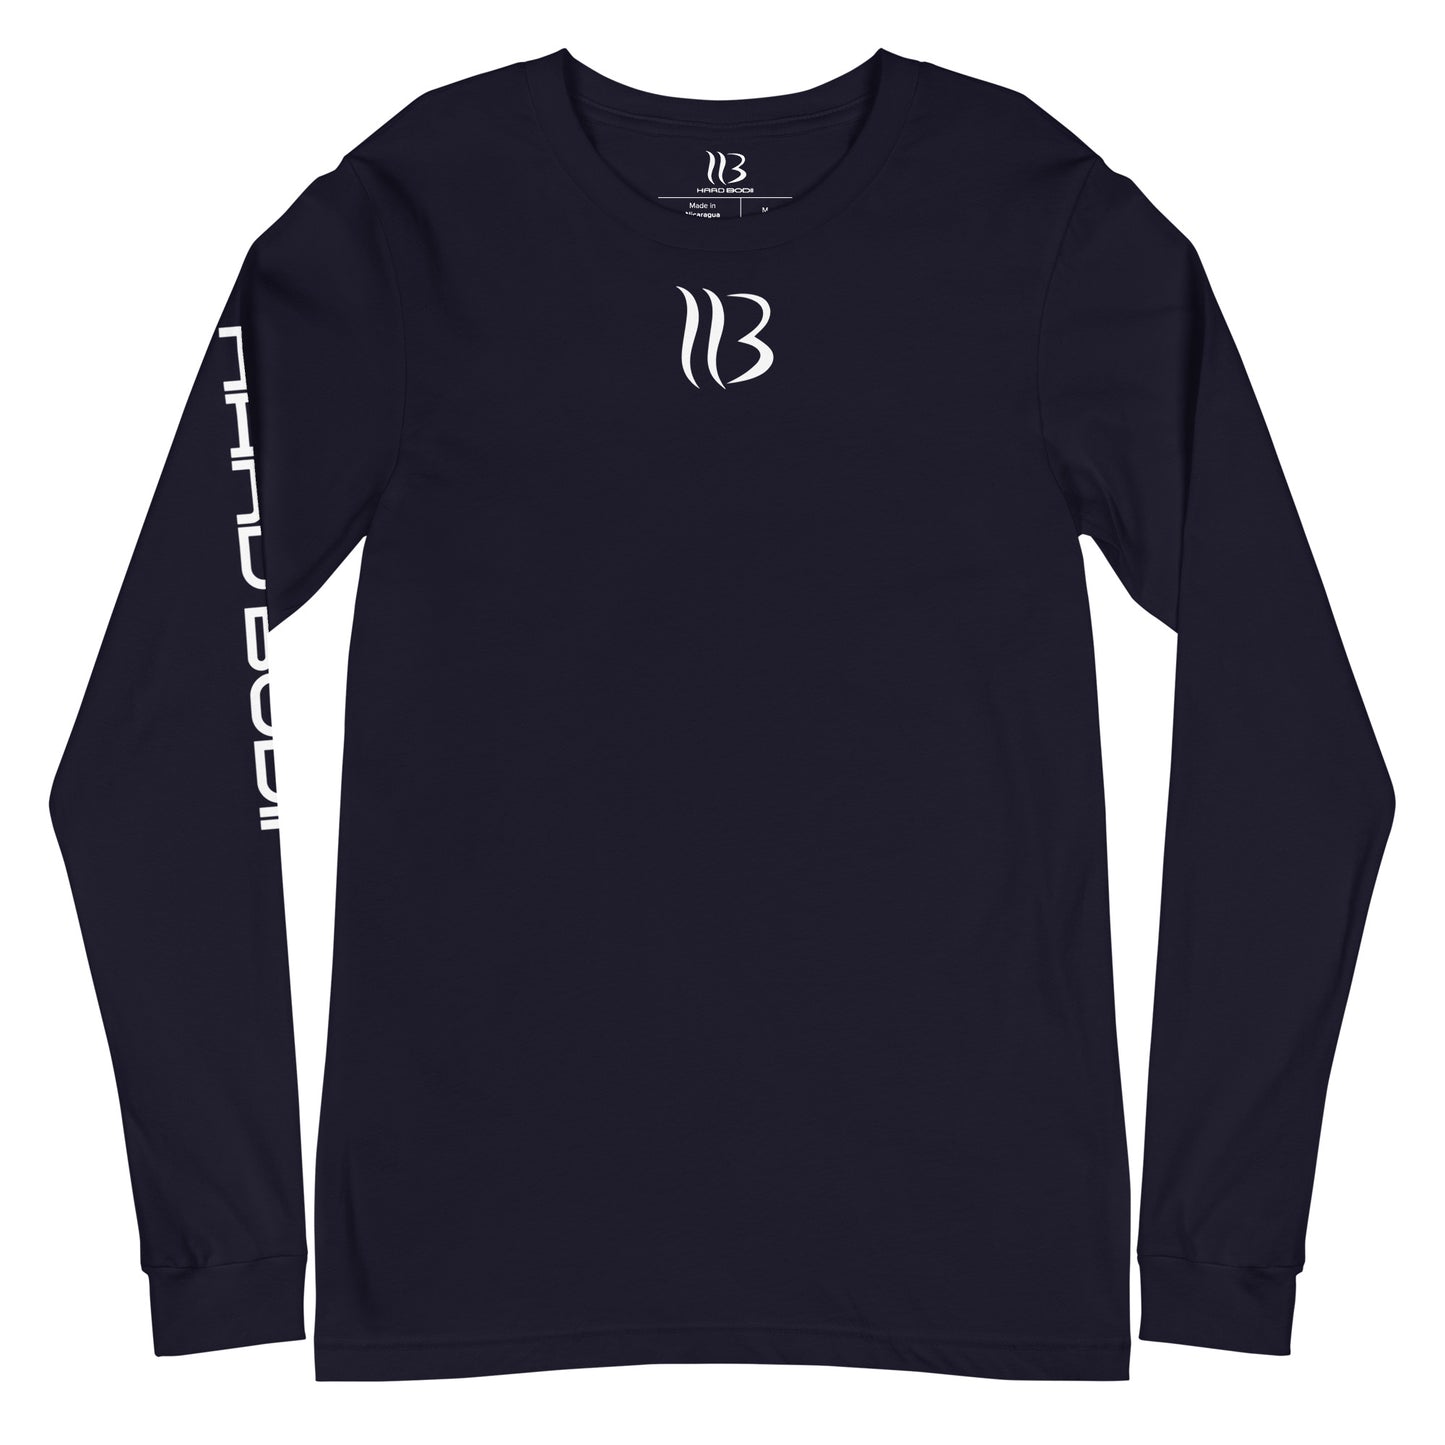 HB Stand Out Long Sleeve Tee navy